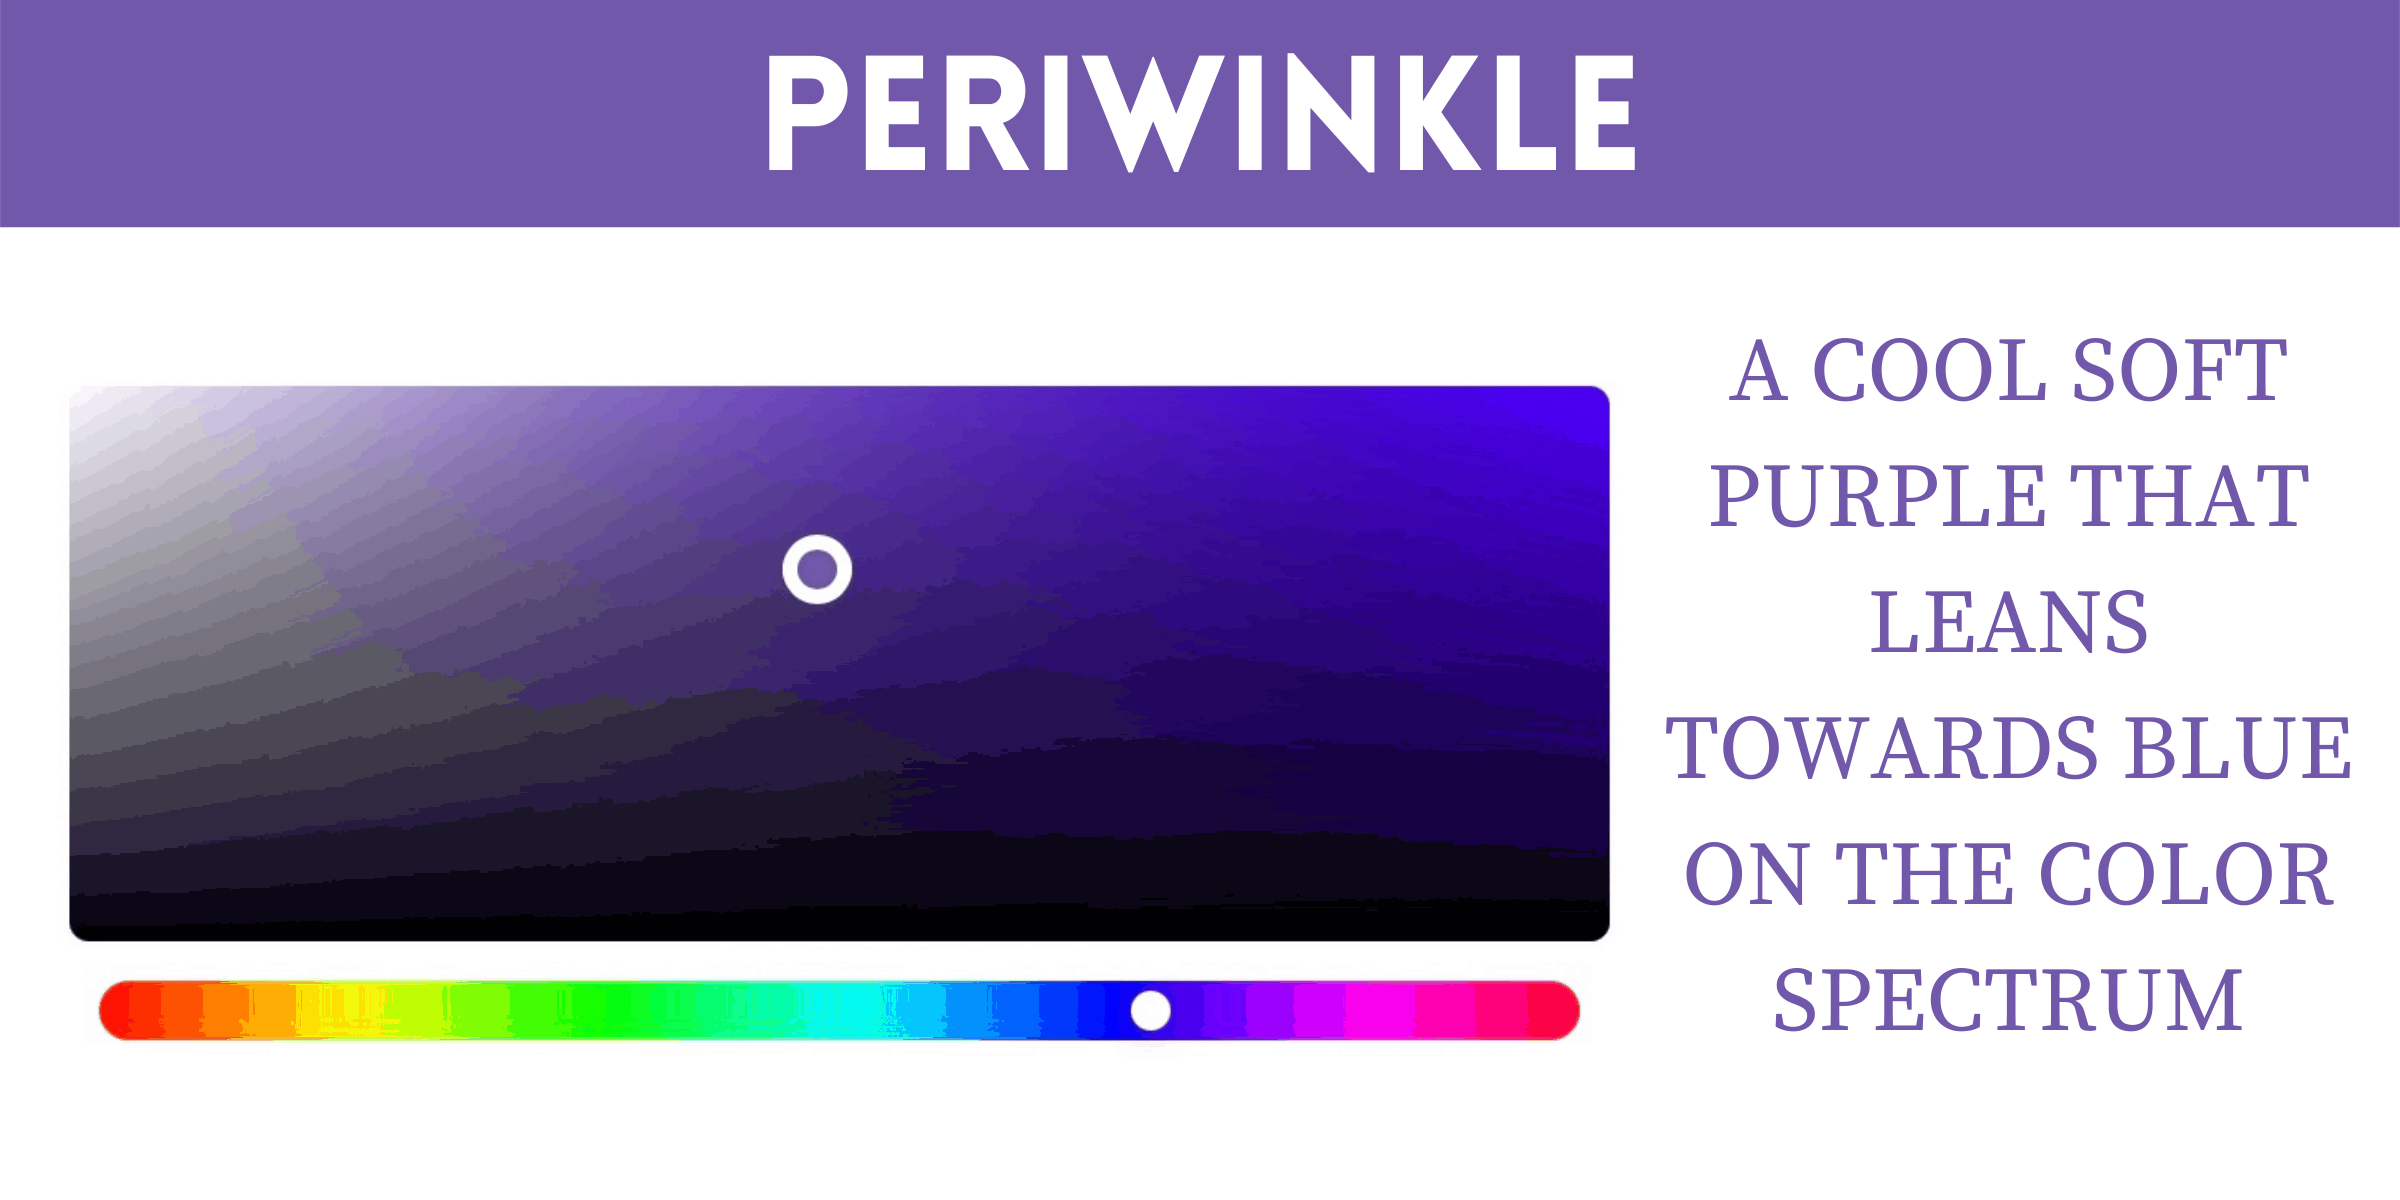 Periwinkle is Universally Flattering color.